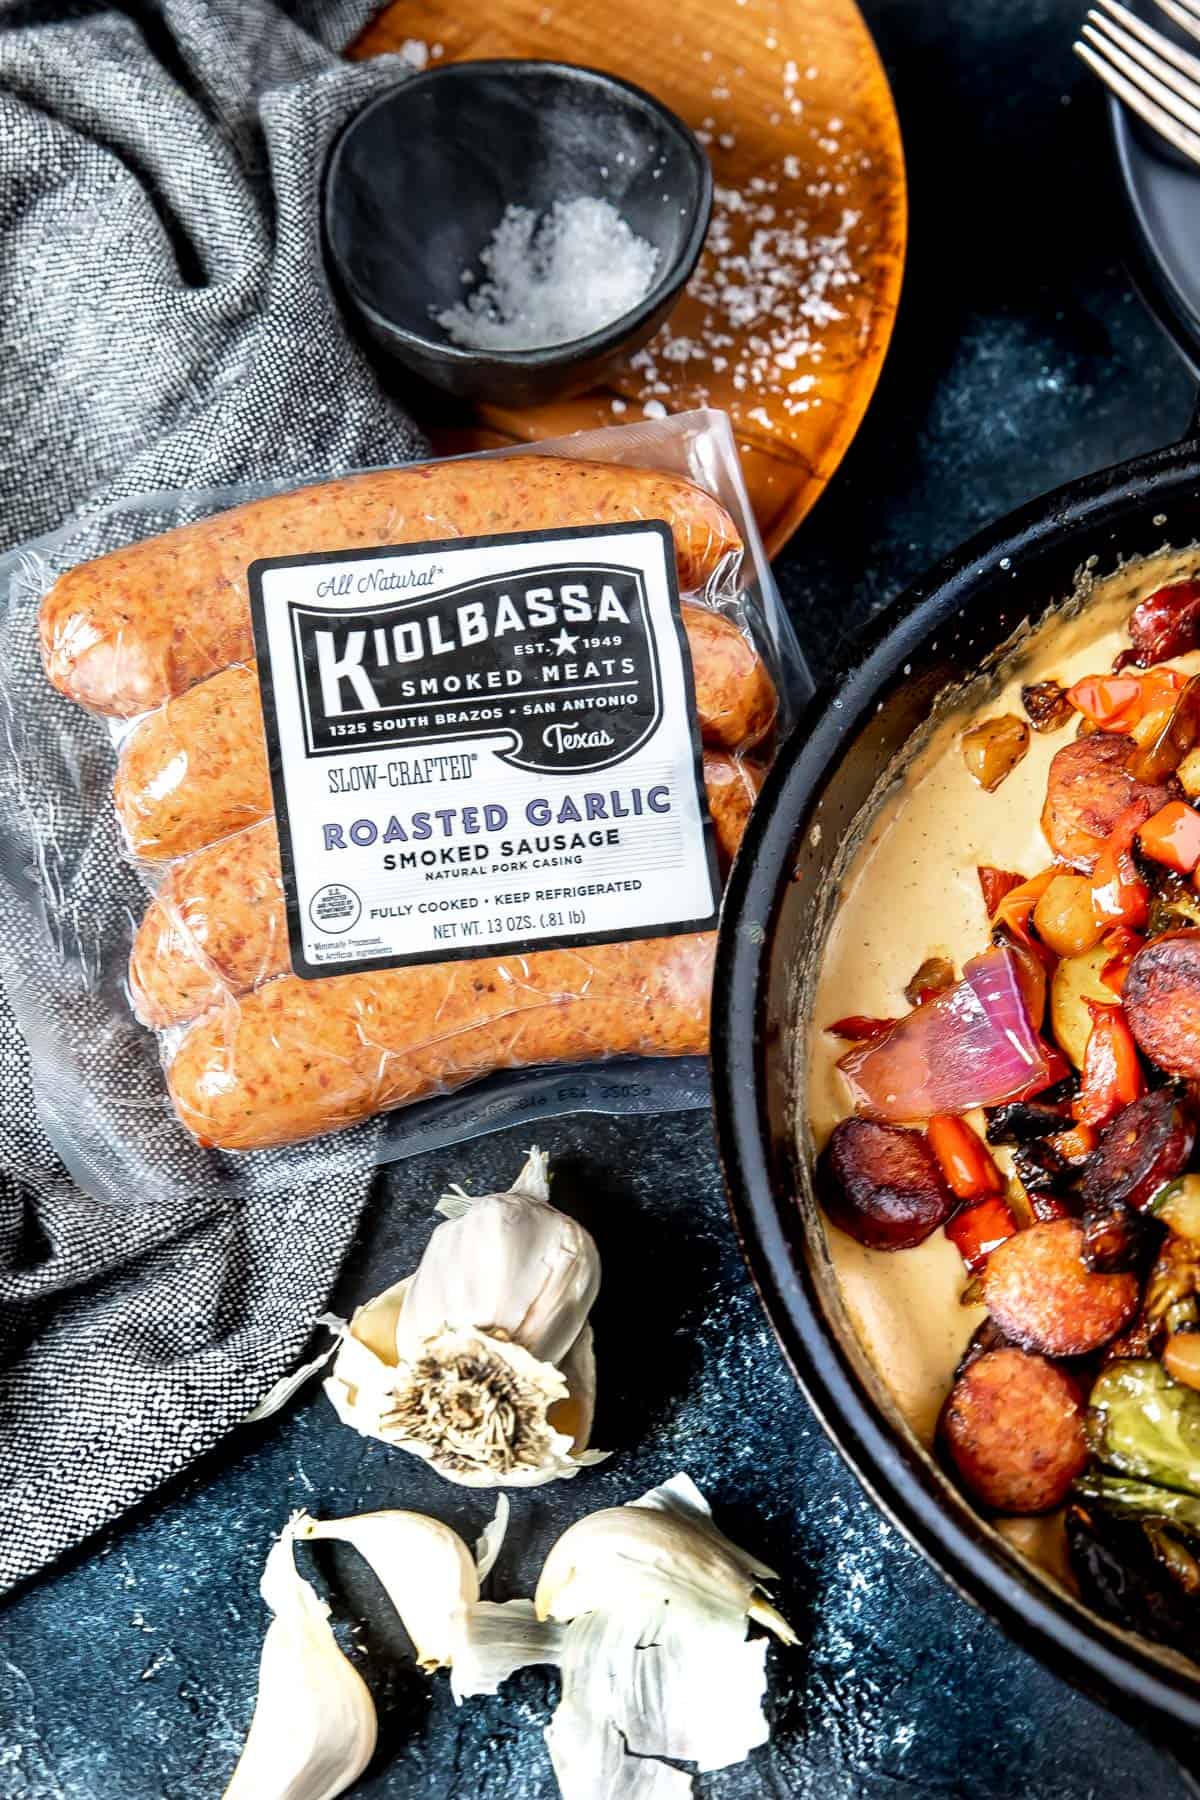 Keto Garlic Parmesan Sausage Skillet with kiolbassa packing prominently featured